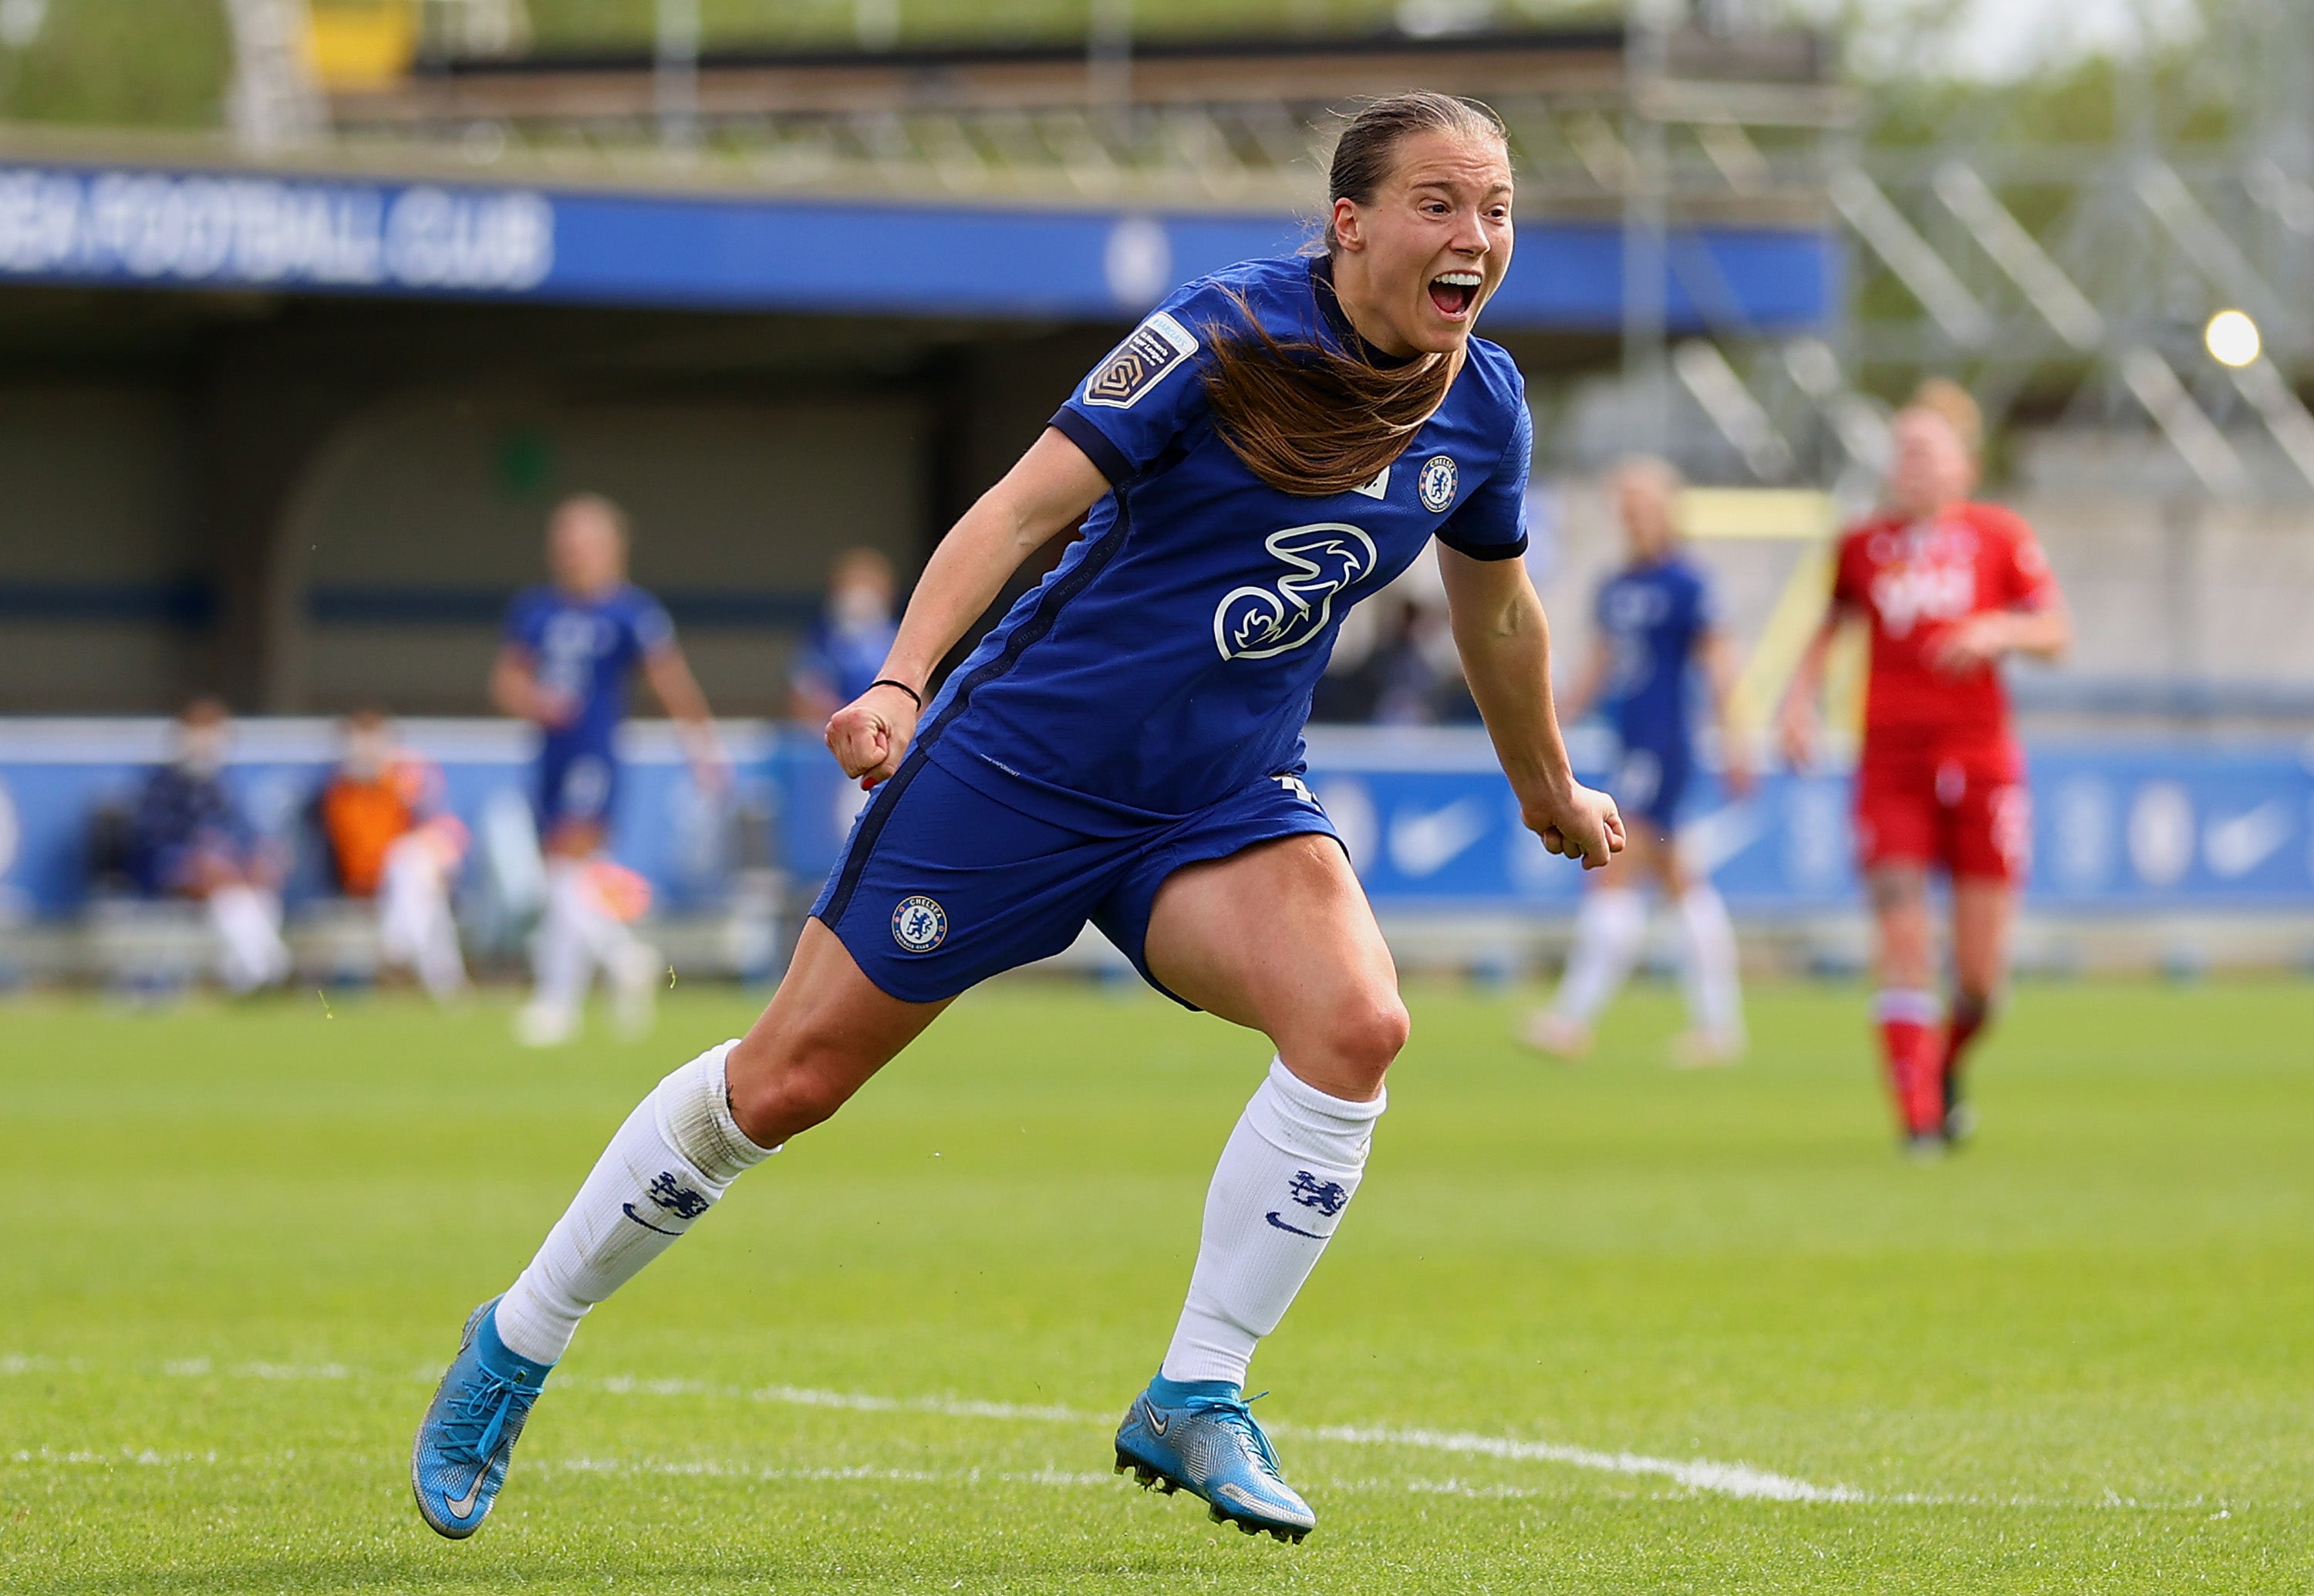 Fran Kirby’s strike partnership with Sam Kerr helped fire Chelsea to the WSL title